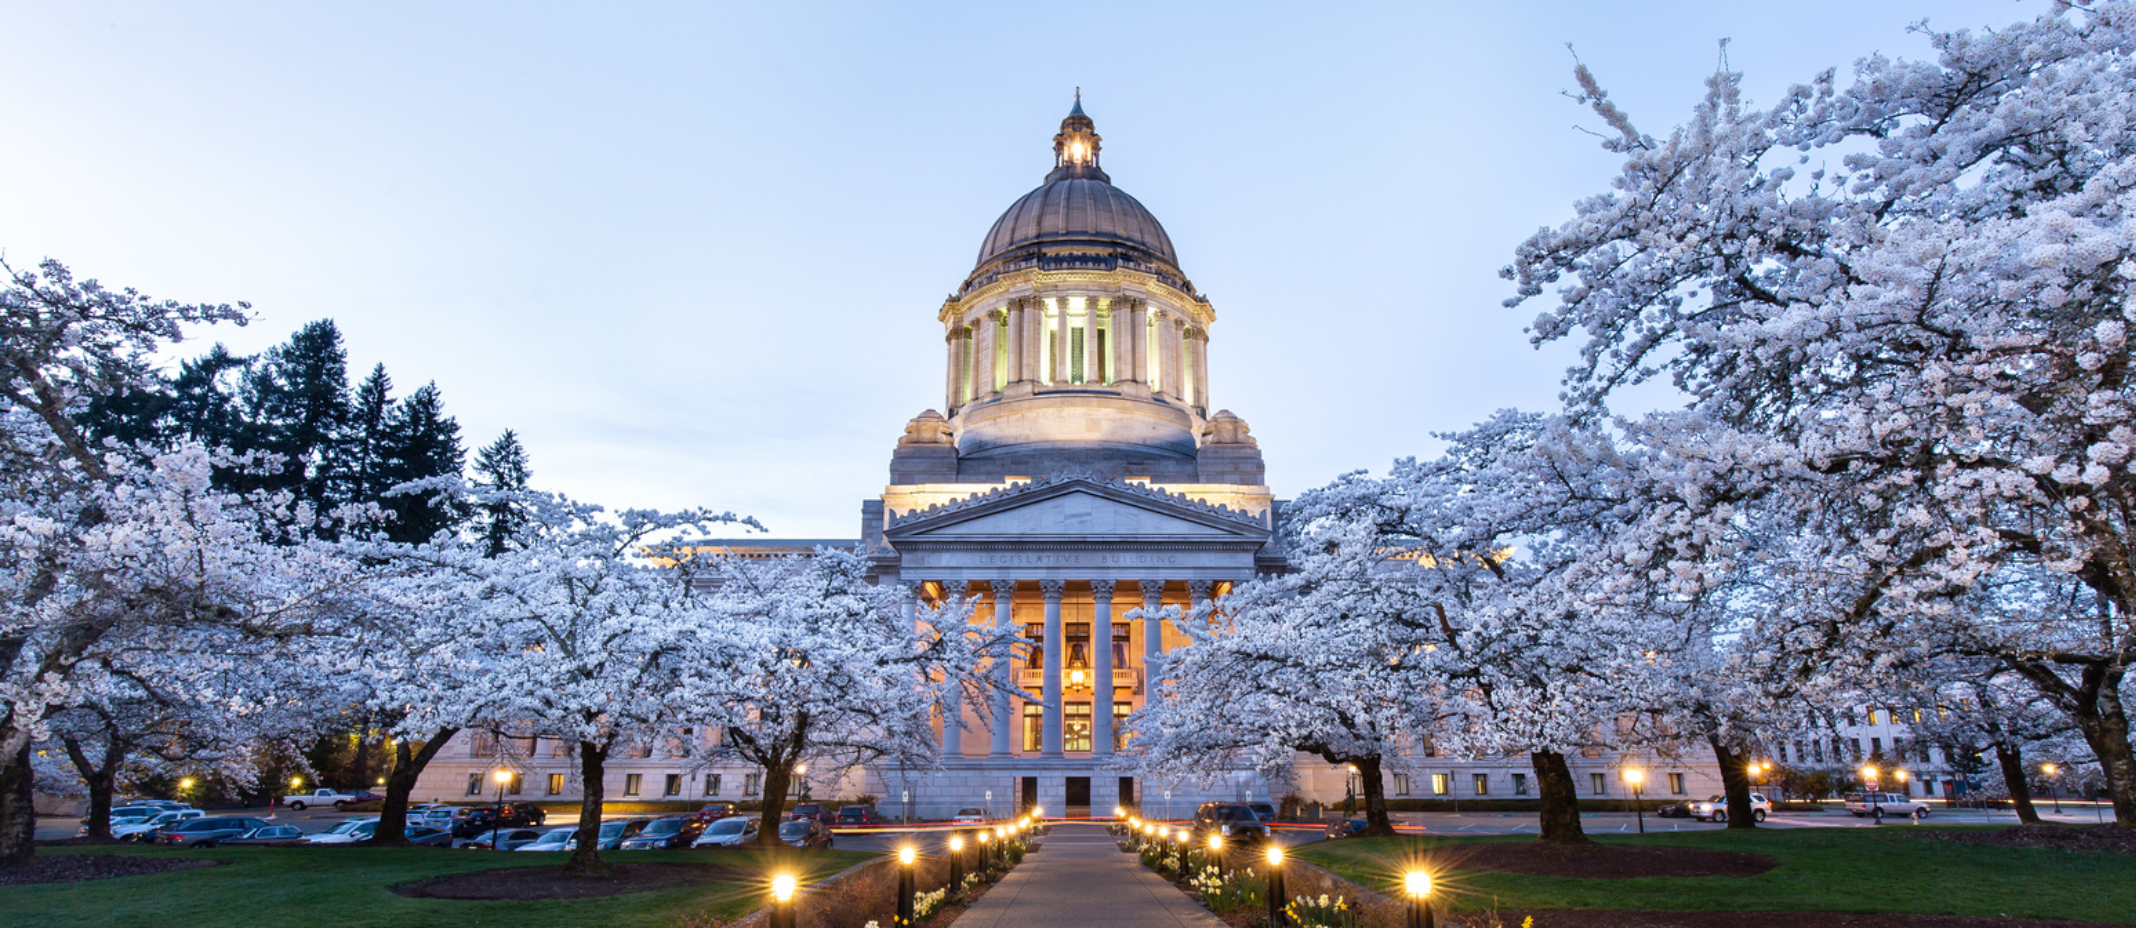 capitol building lit up at night with cherry blossoms